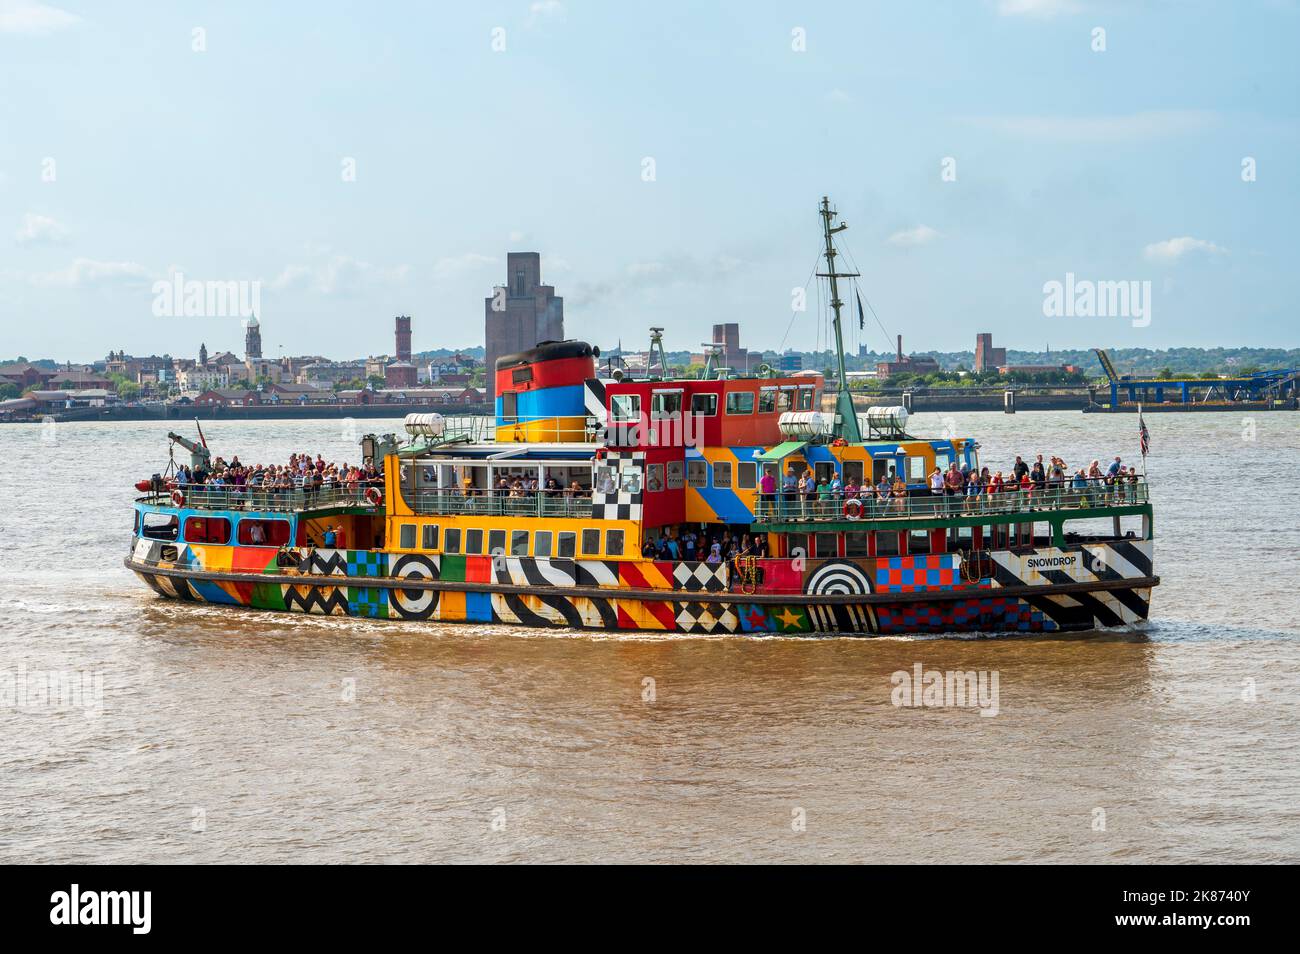 The Mersey ferry Snowdrop arriving at the Pier Head, Liverpool, Merseyside, England, United Kingdom, Europe Stock Photo